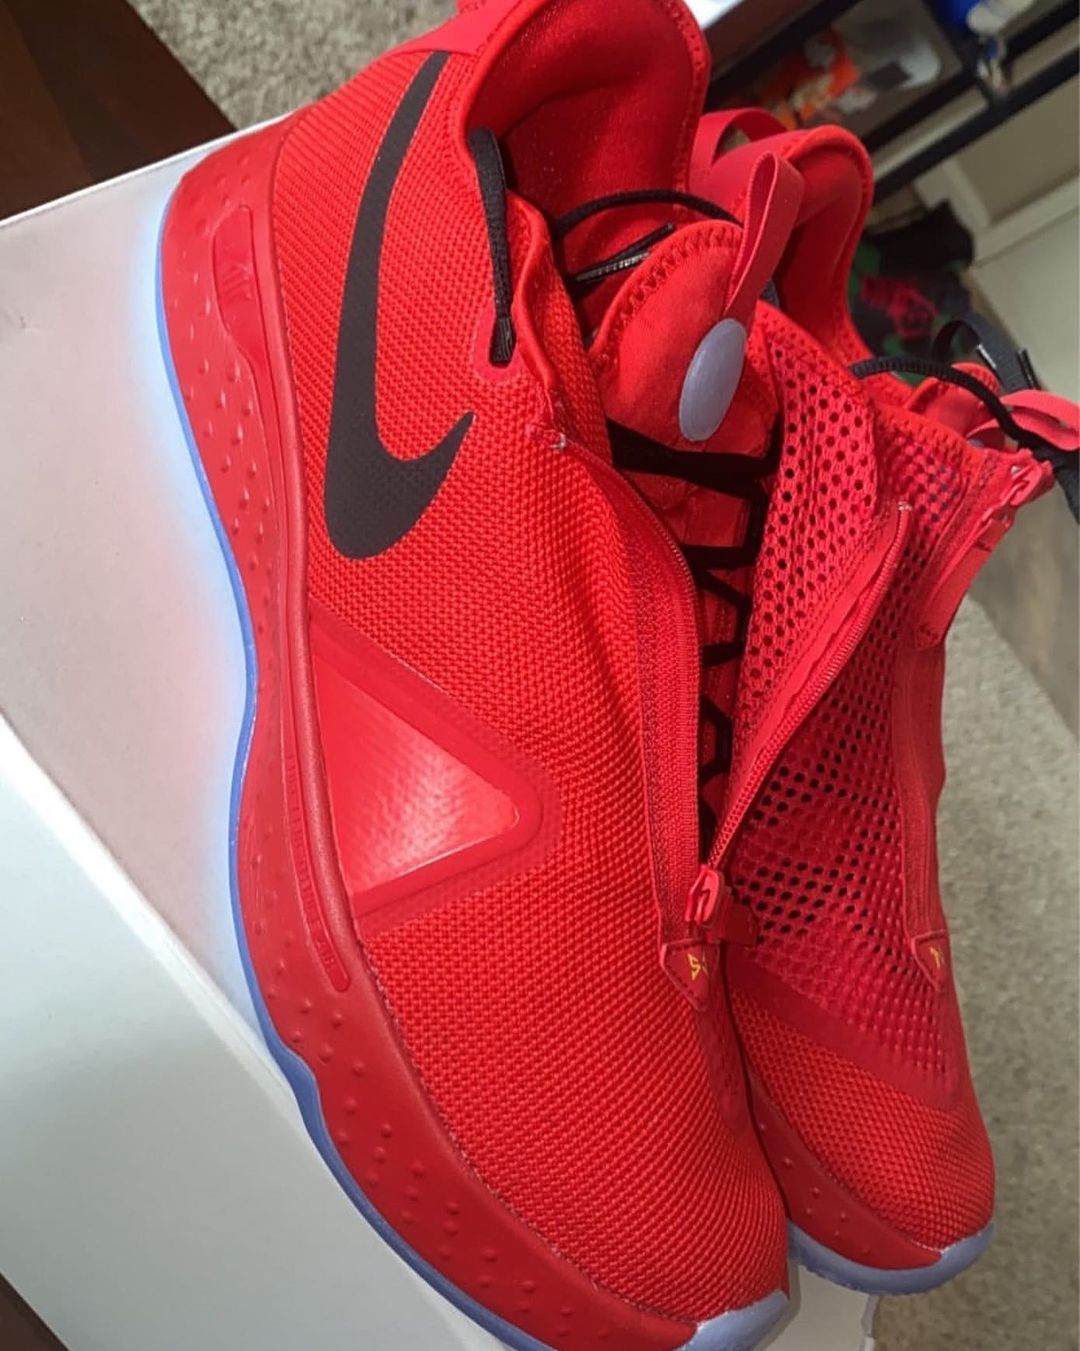 Nike By You iD PG 4 University Red Black